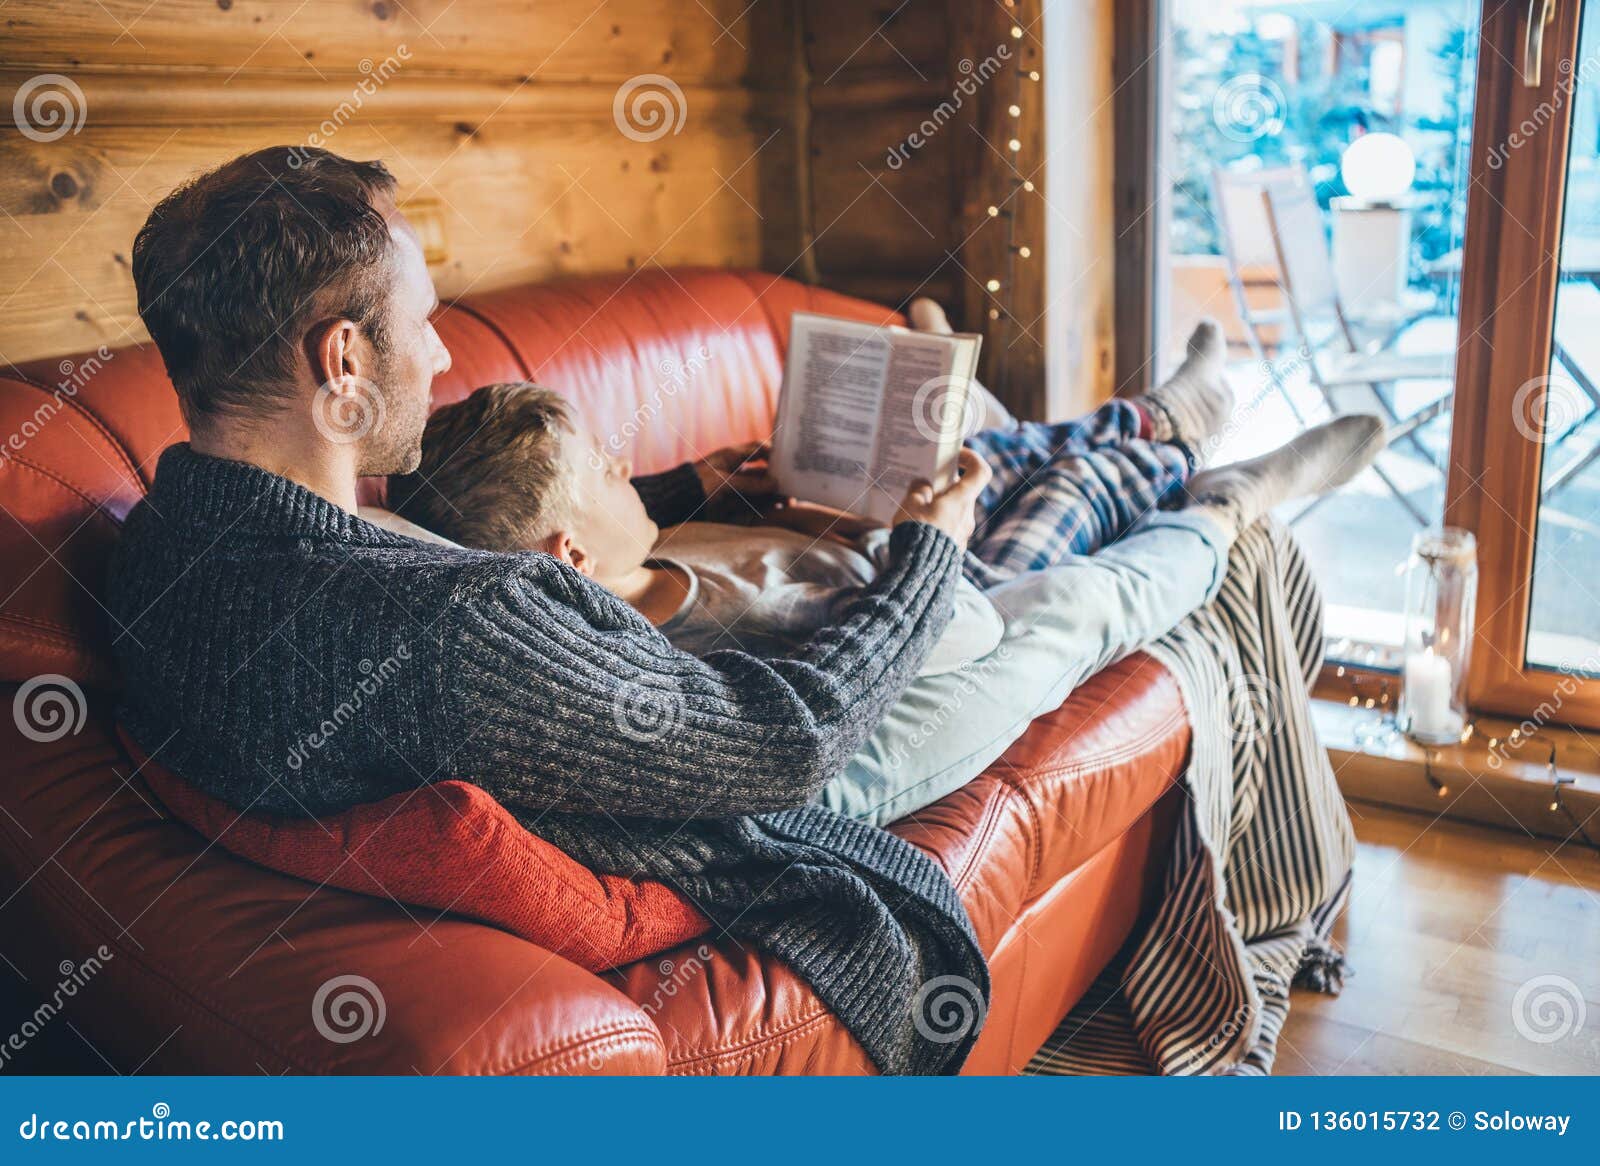 father and son reading book together lying on the cozy sofa in warm country house. reading to kids conceptual image